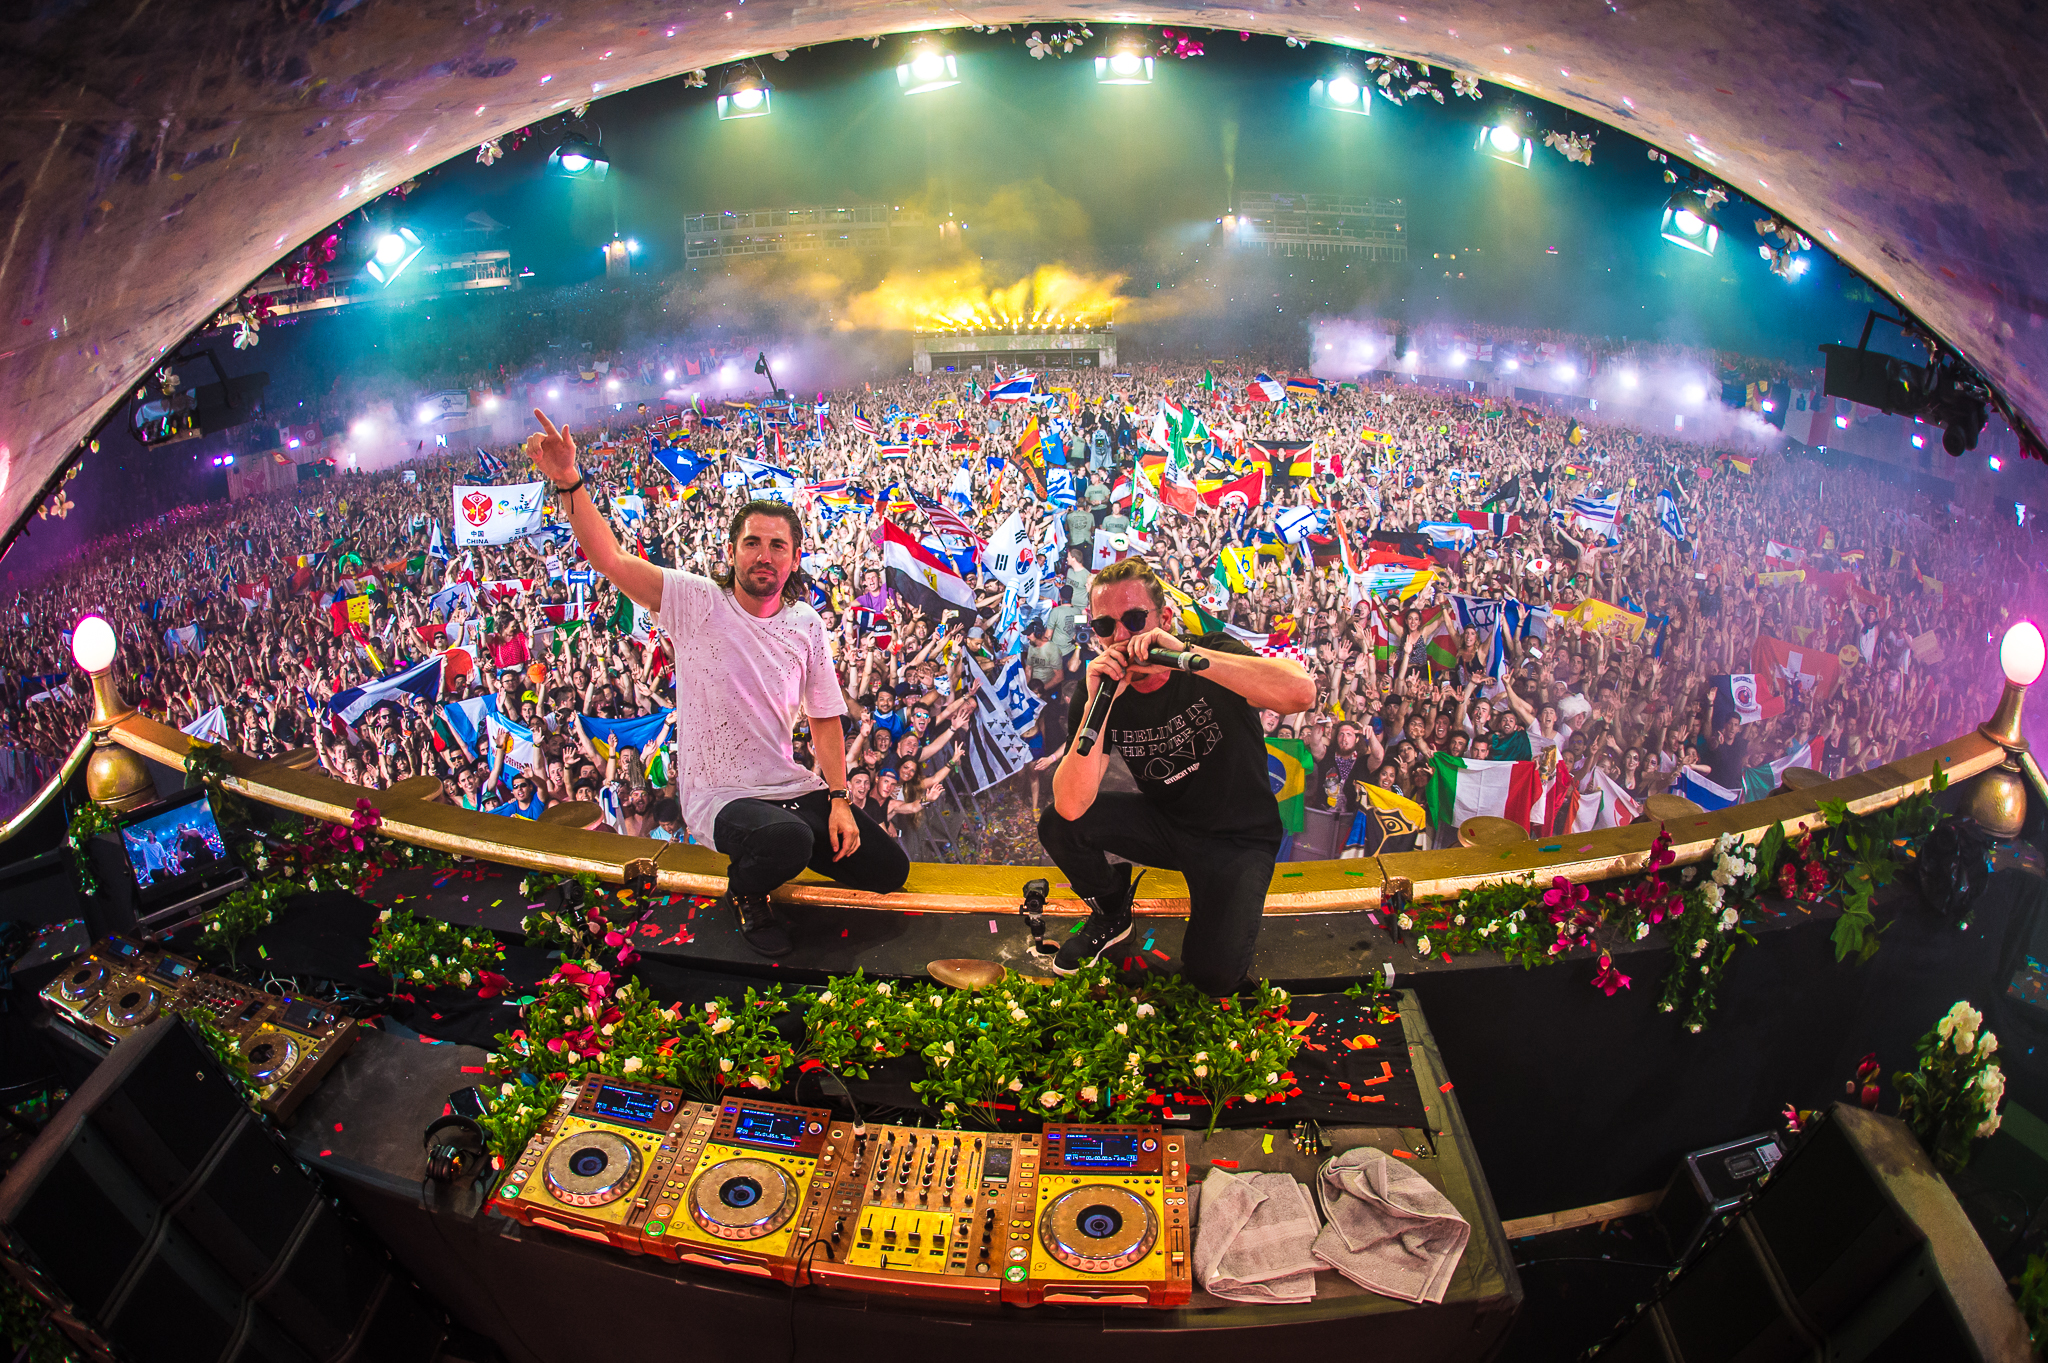 Dimitri Vegas &amp; Like Mike: “Tomorrowland is a musical playground where you can experience all genres&quot;